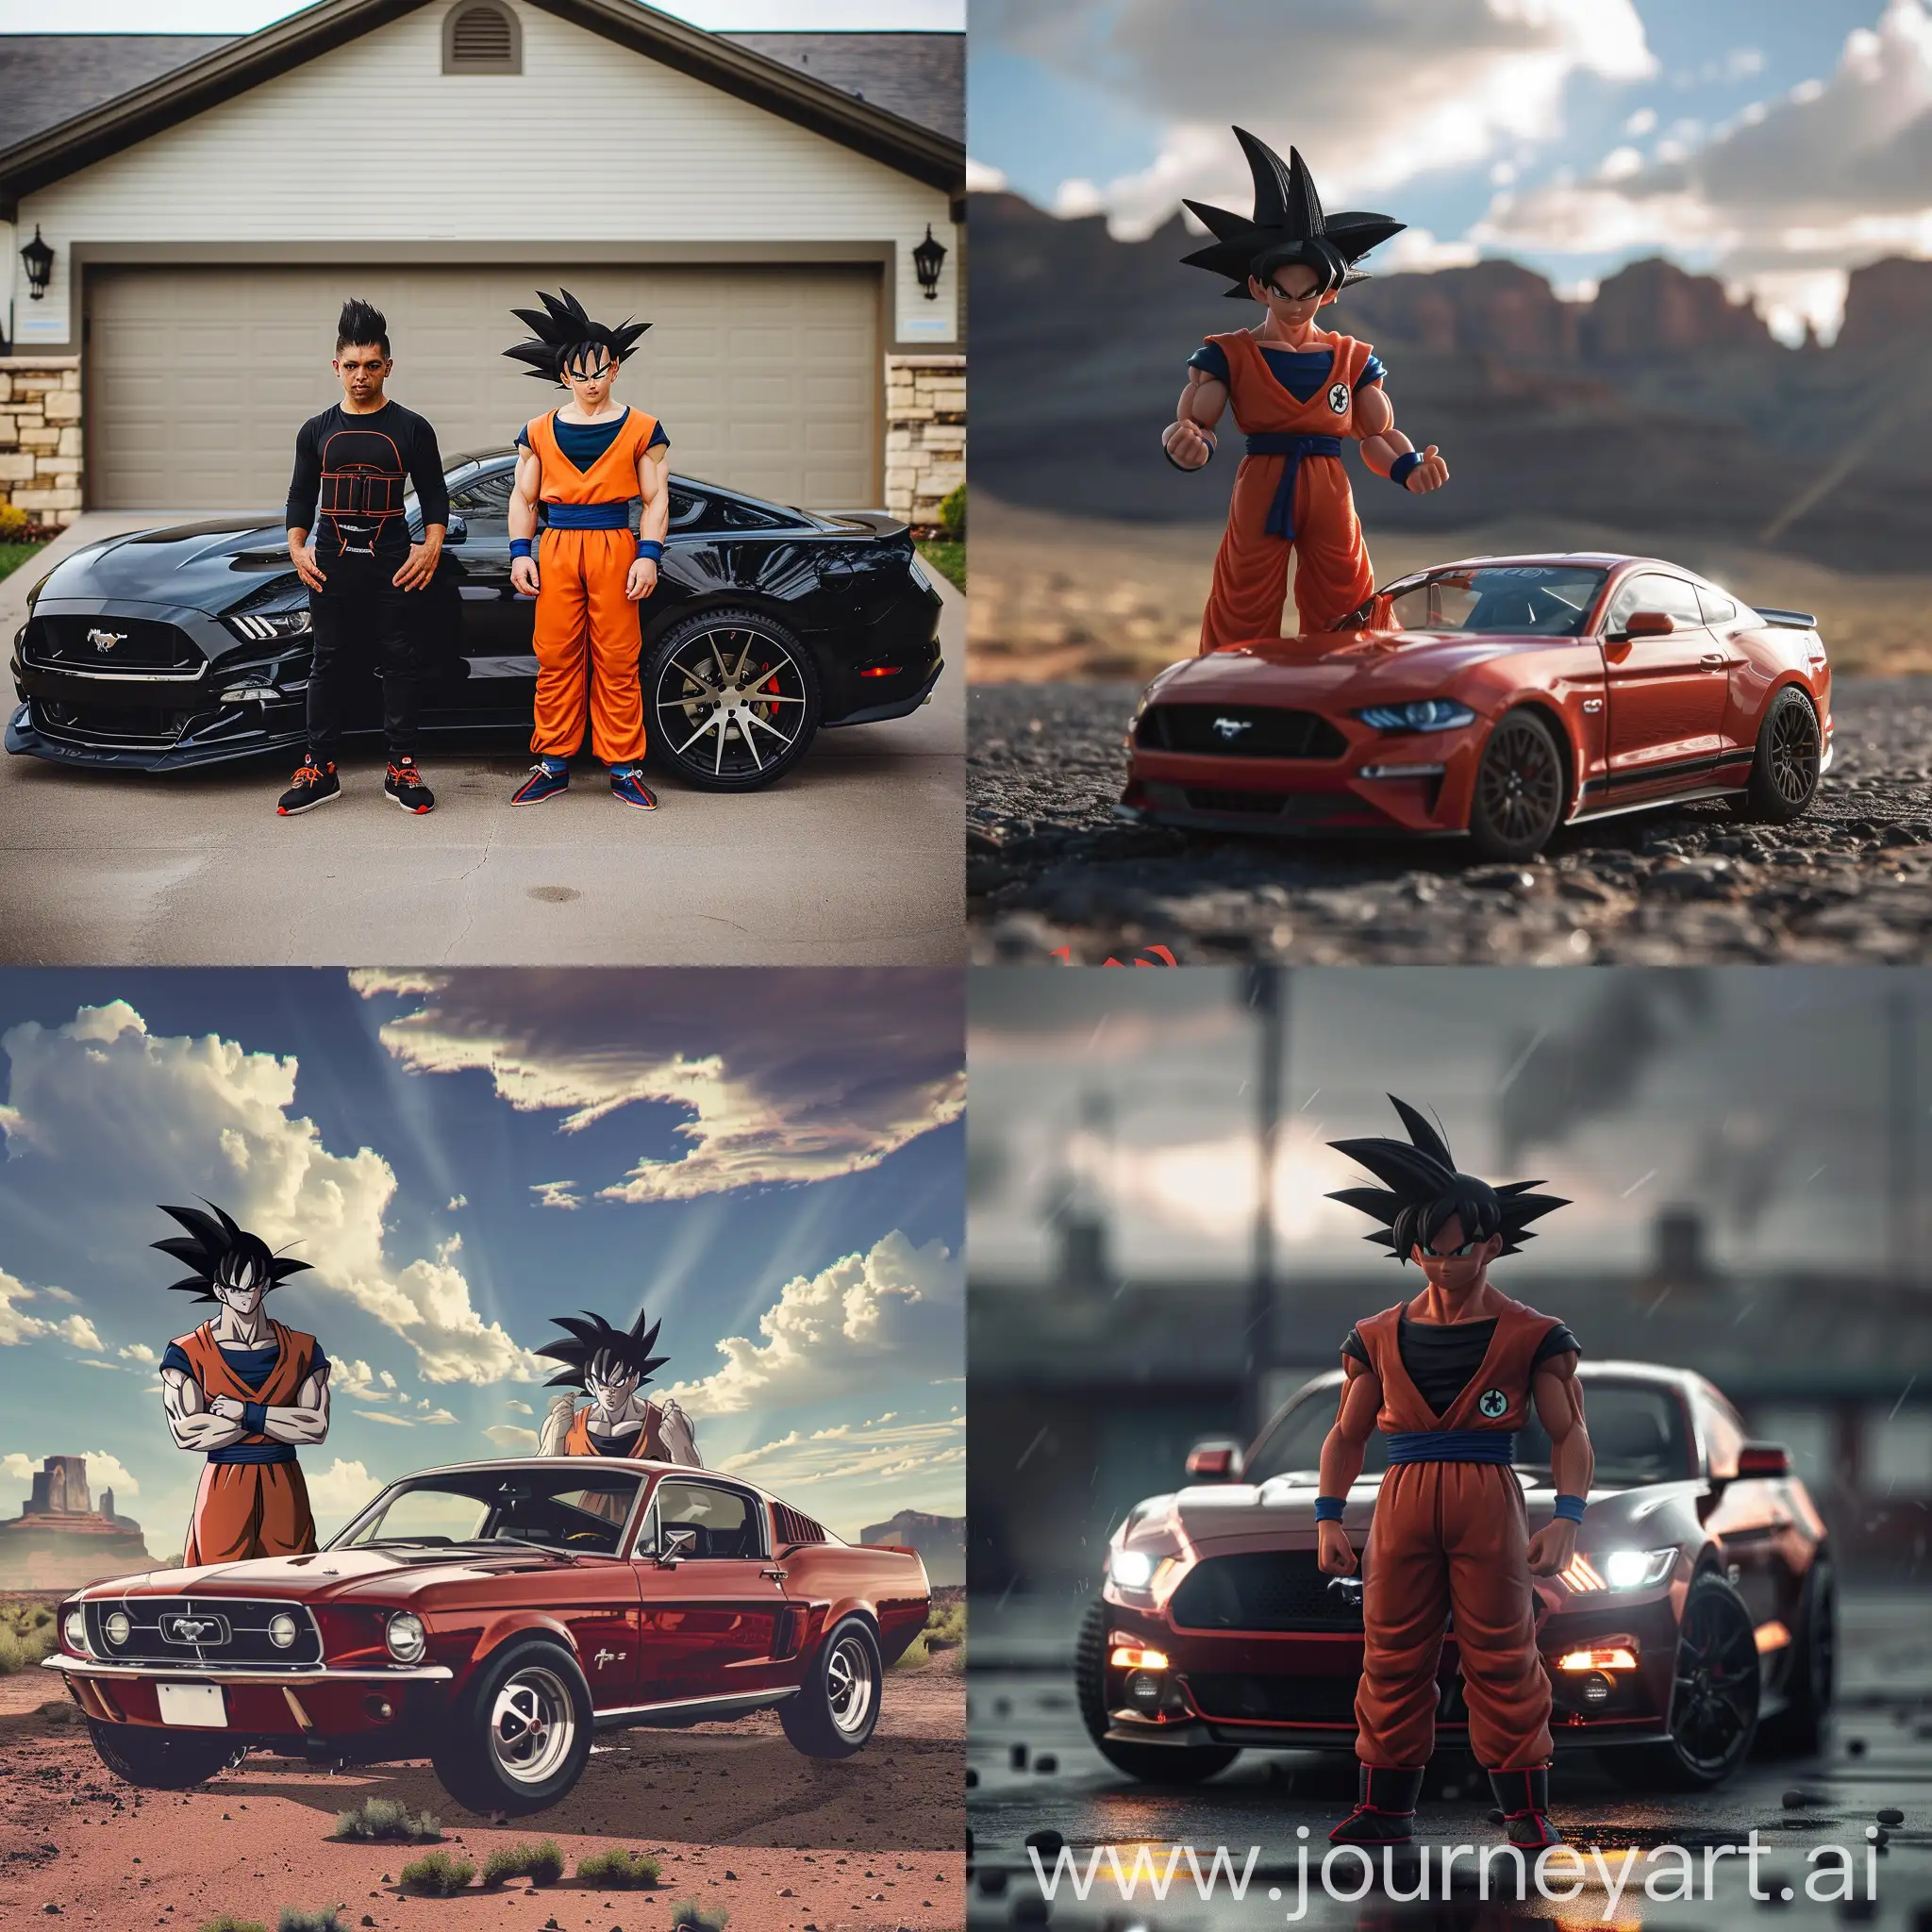 Goku-and-Mustang-Stand-Together-in-a-Dynamic-Scene